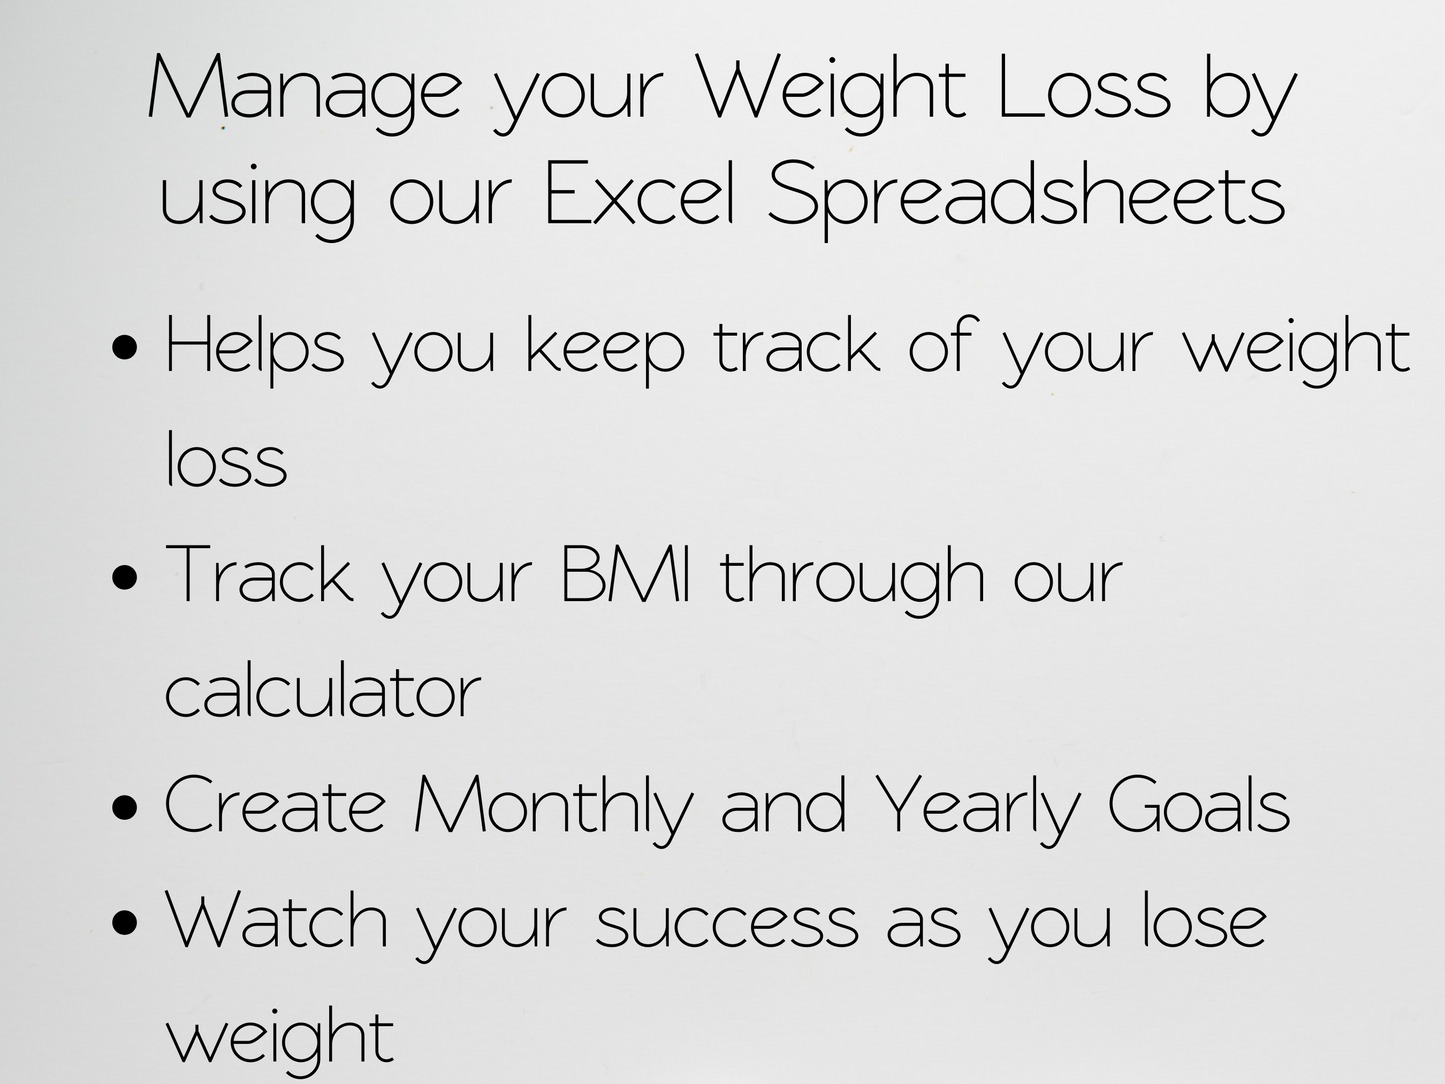 Weight Loss Tracker Template Google Sheets Excel Spreadsheet